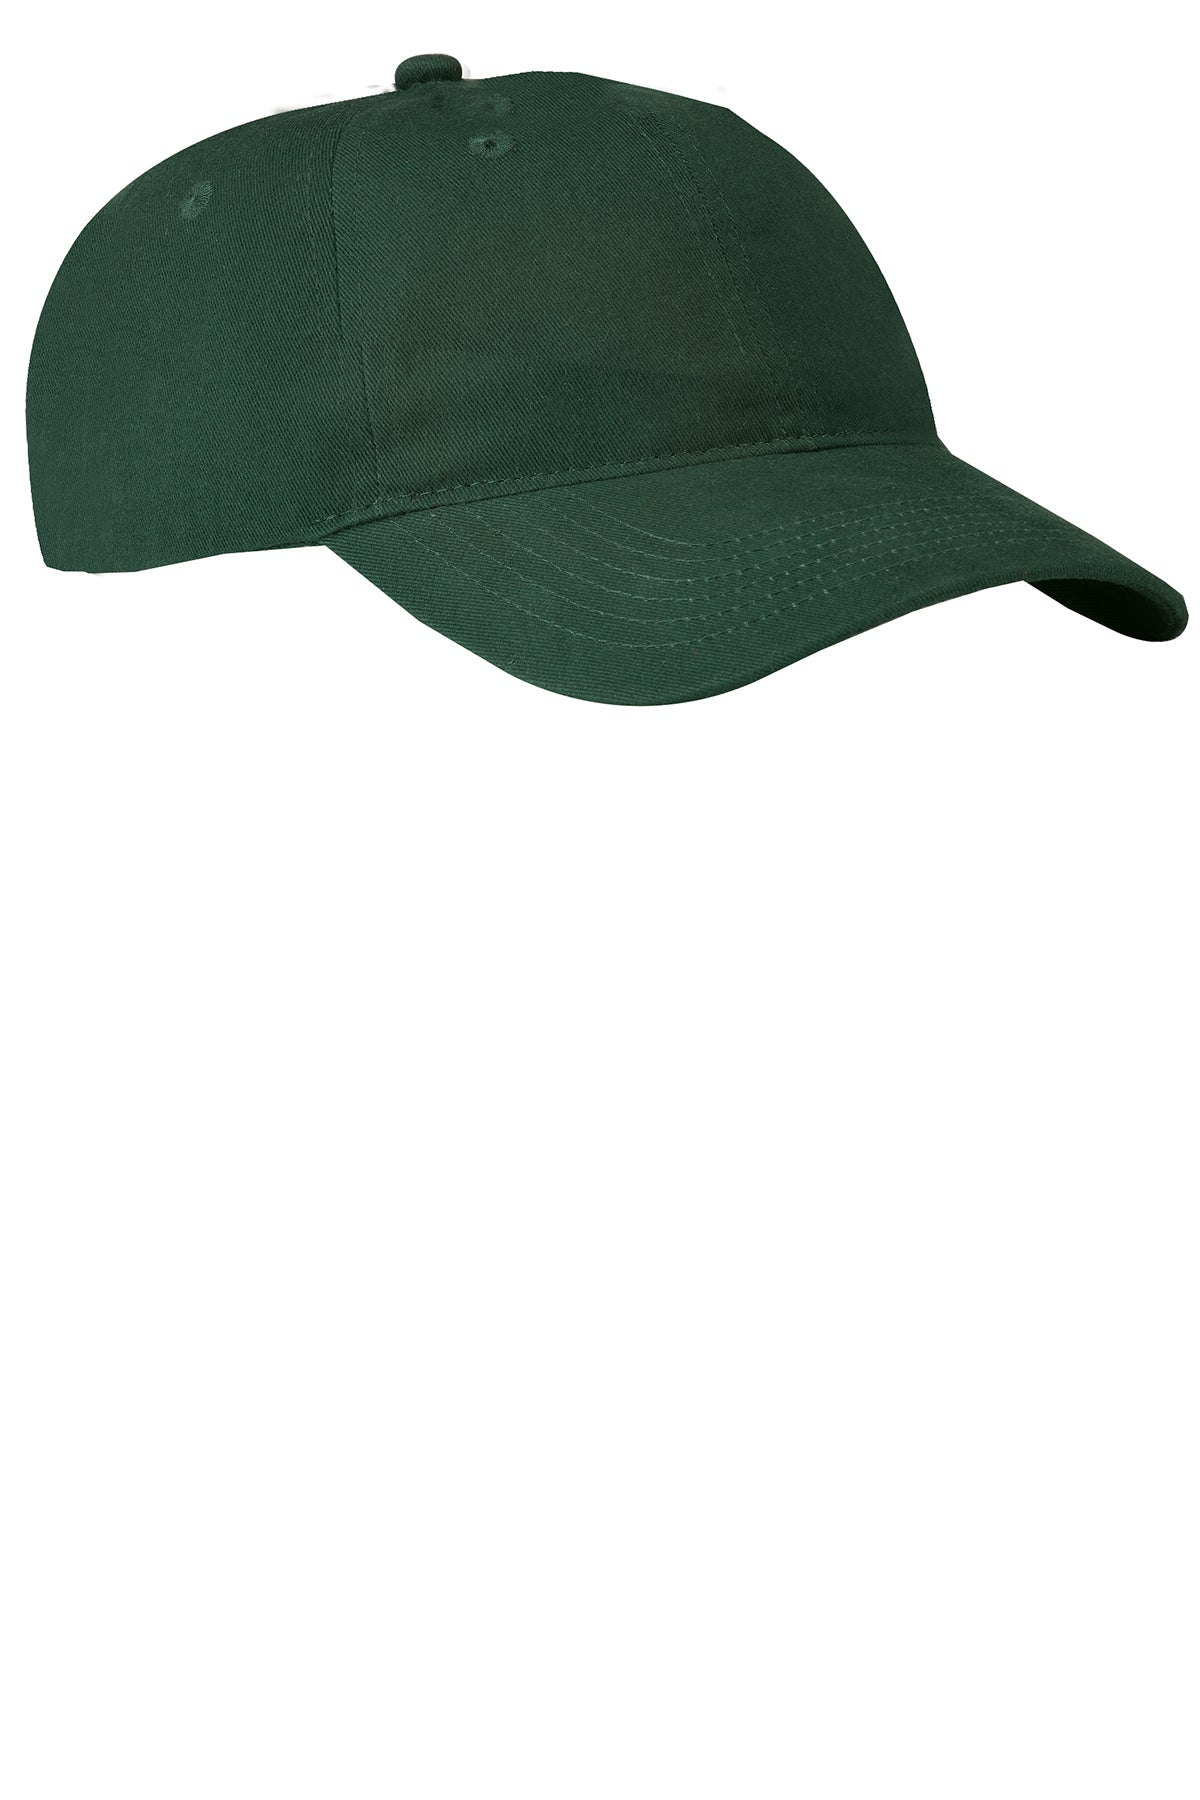 Port & Company Brushed Twill Branded Caps, Hunter